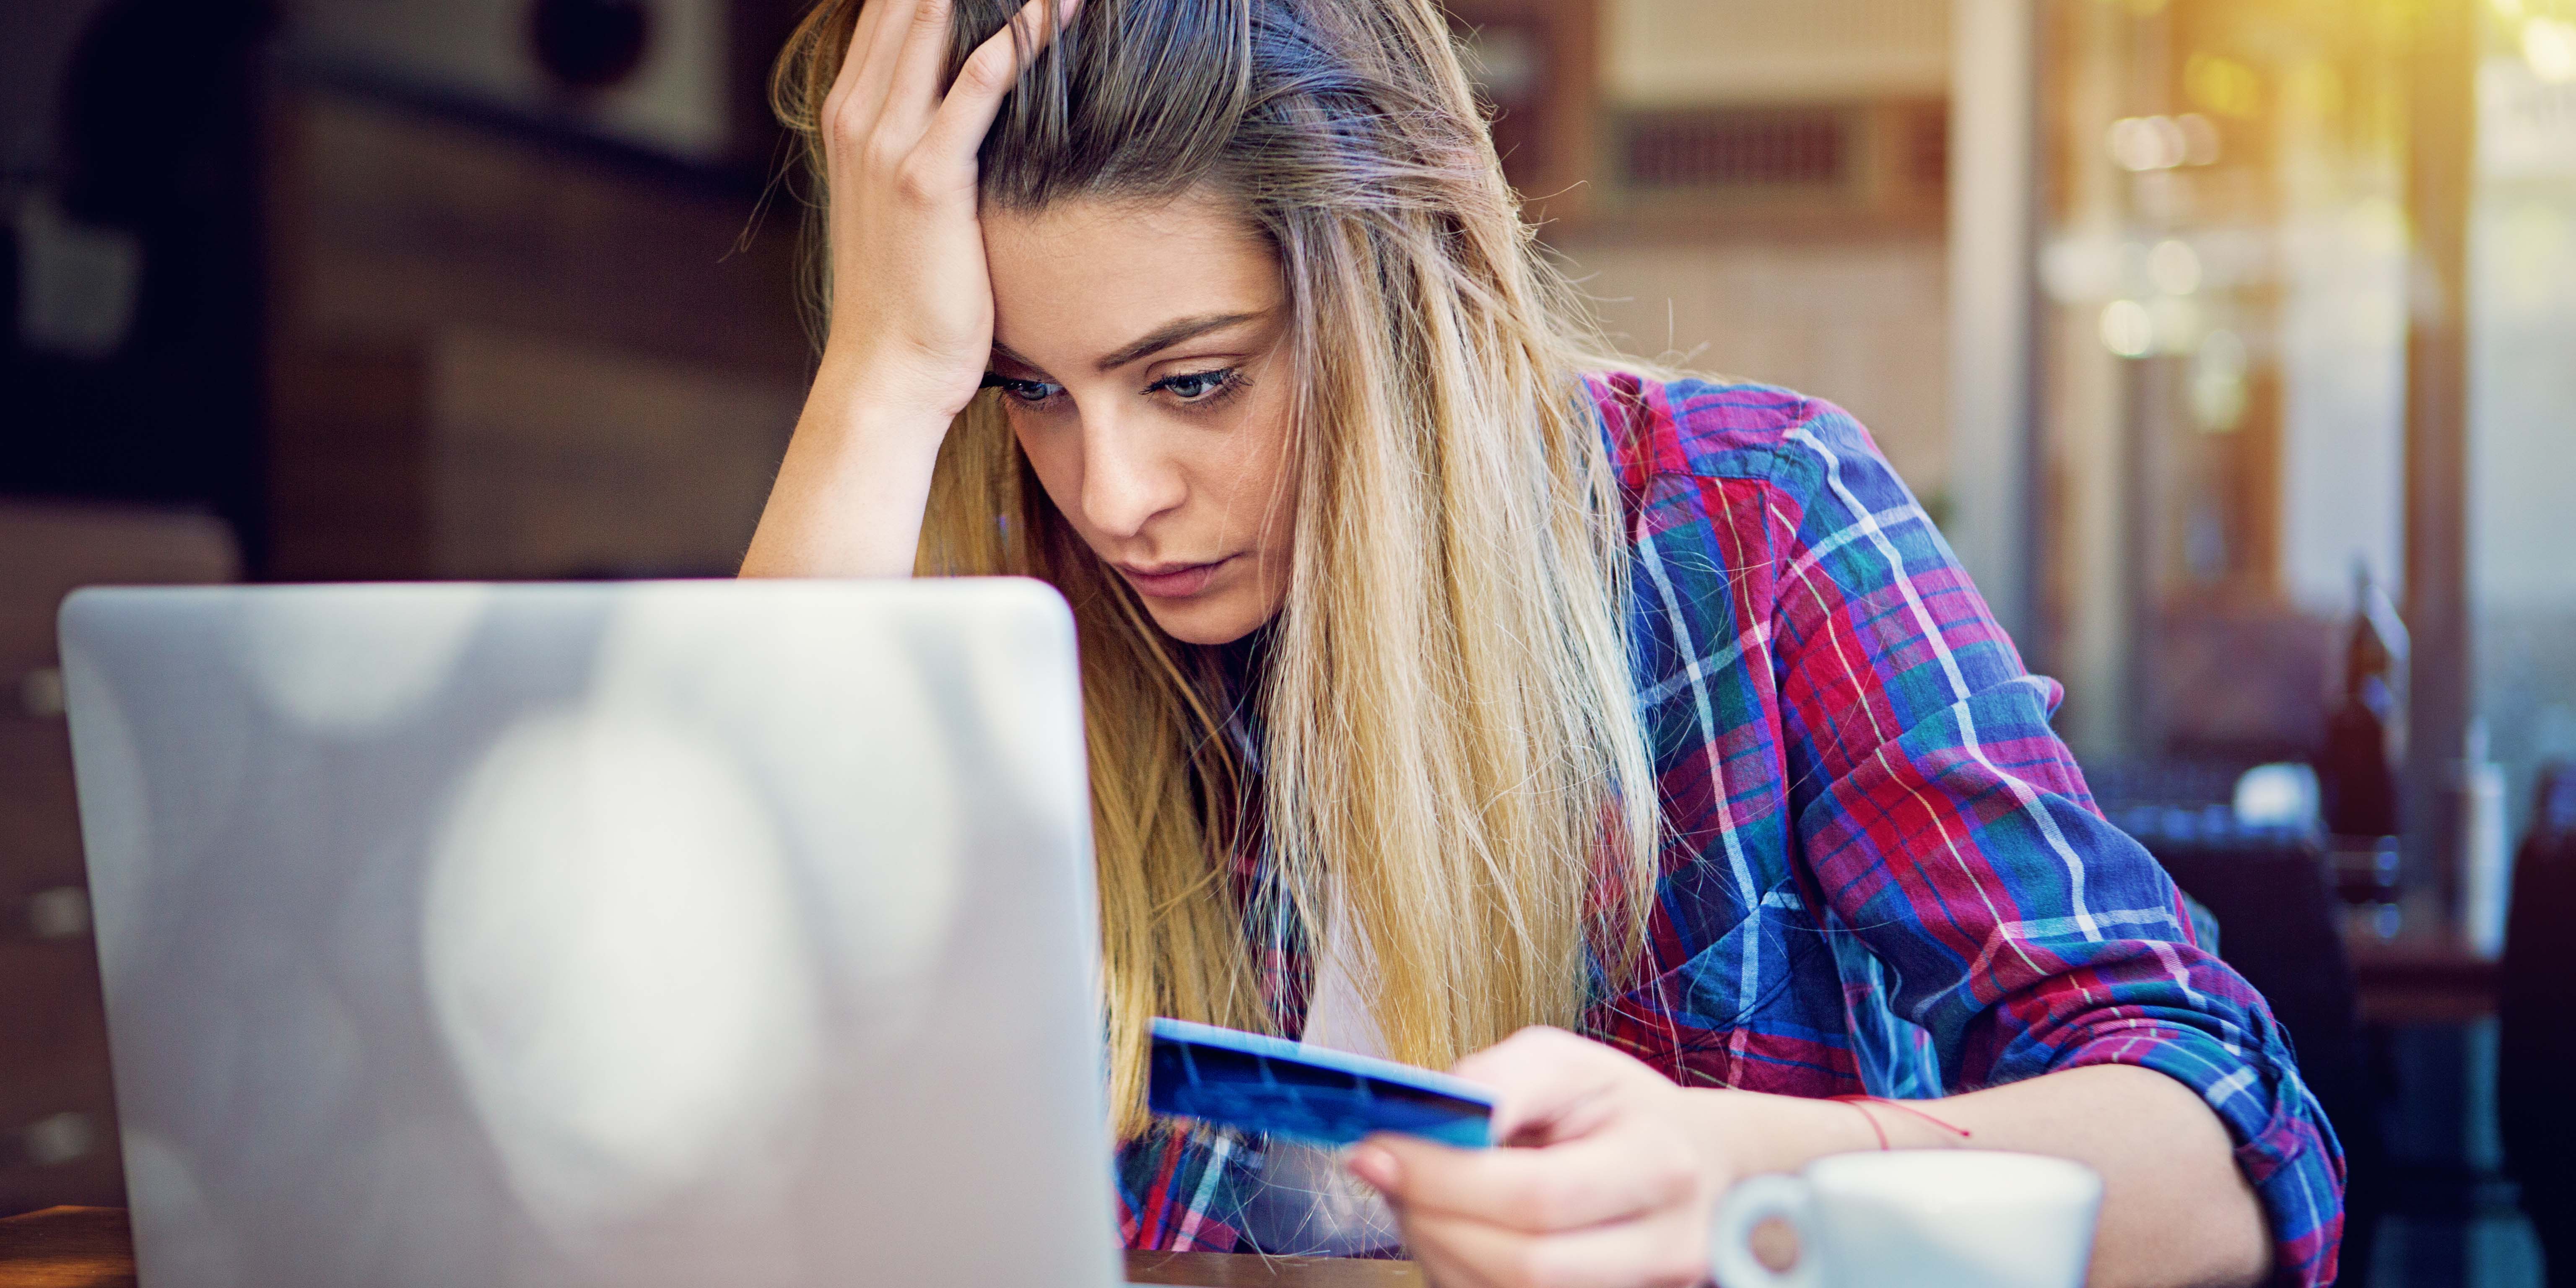 Frustrated woman stares at laptop holding credit card